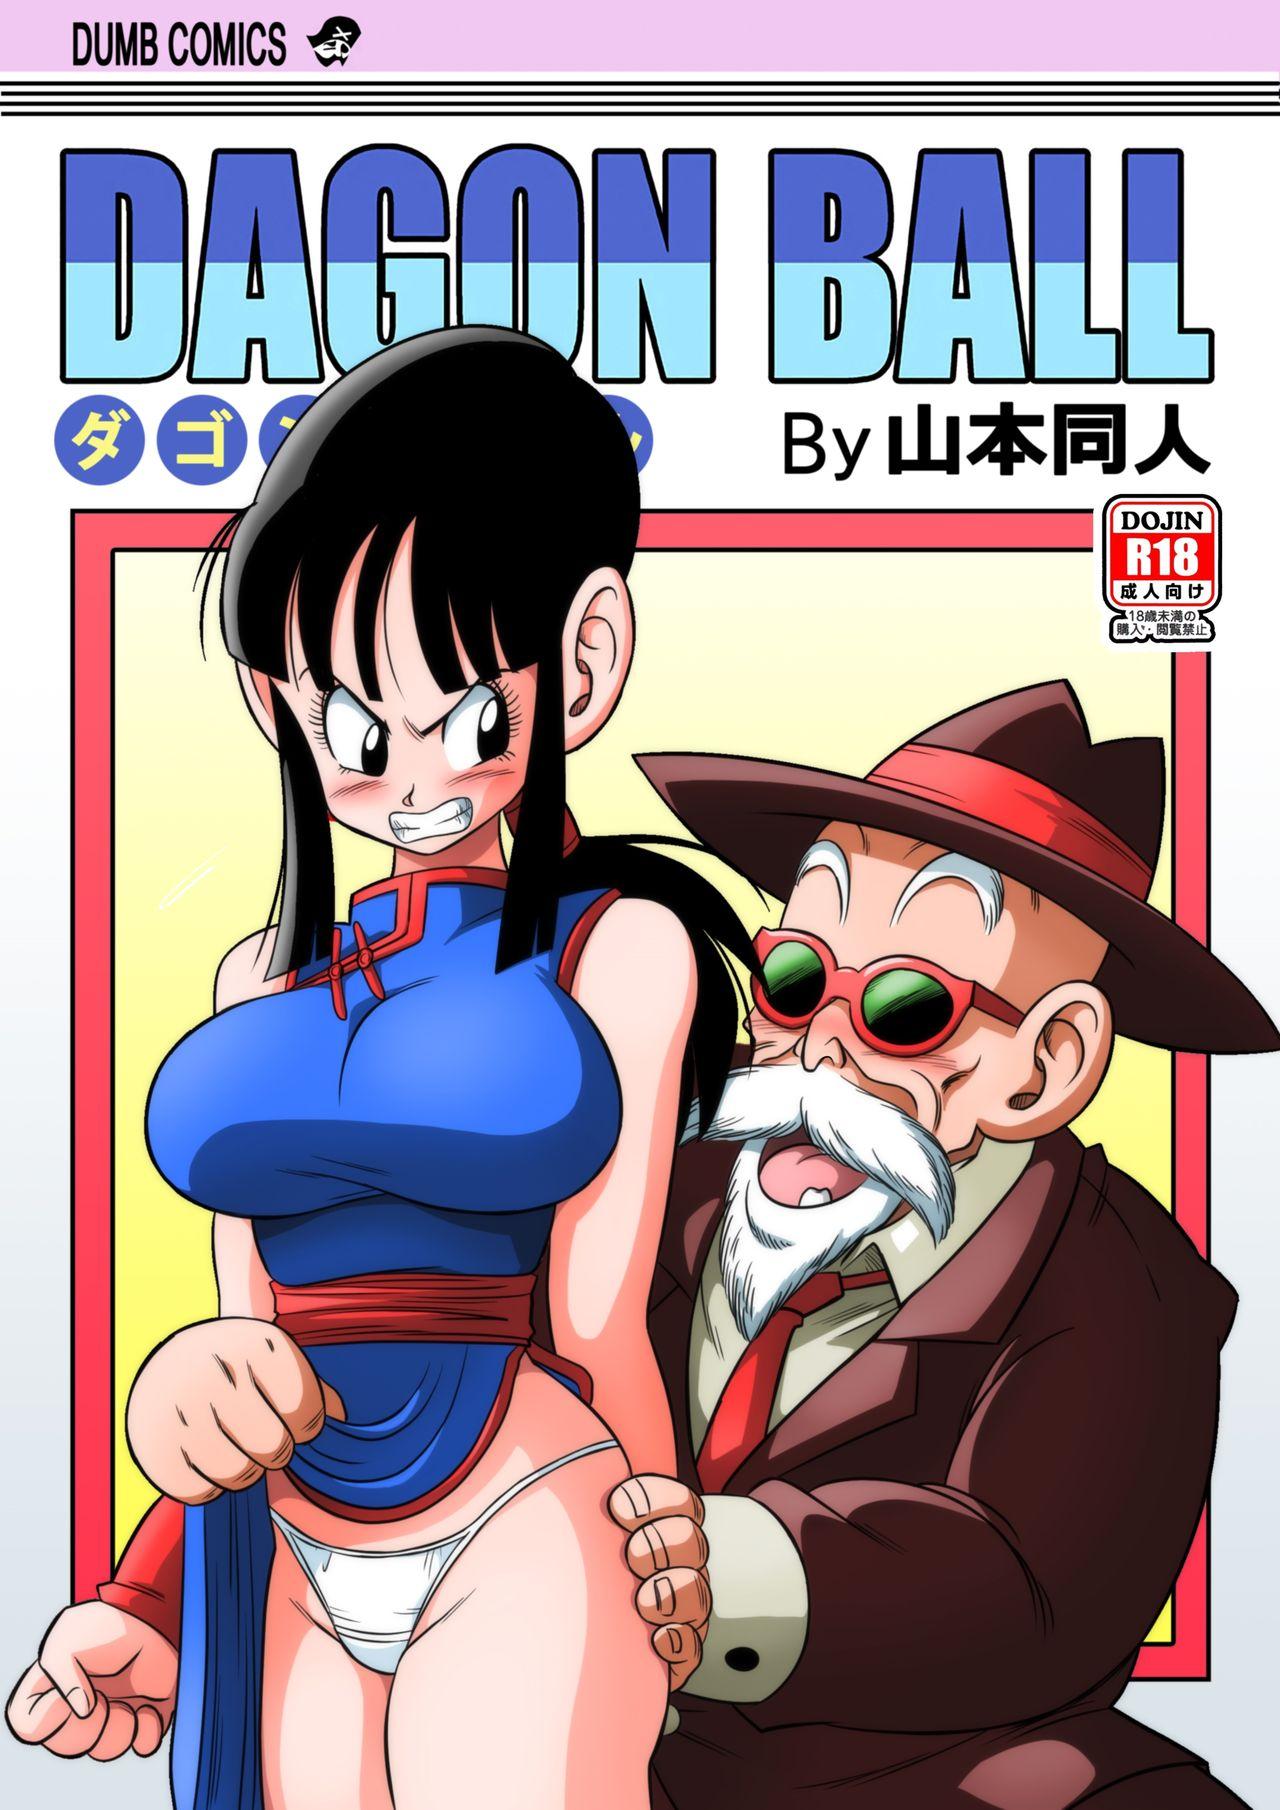 Dicks "An Ancient Tradition" - Young Wife is Harassed! - Dragon ball z Foot Fetish - Page 1